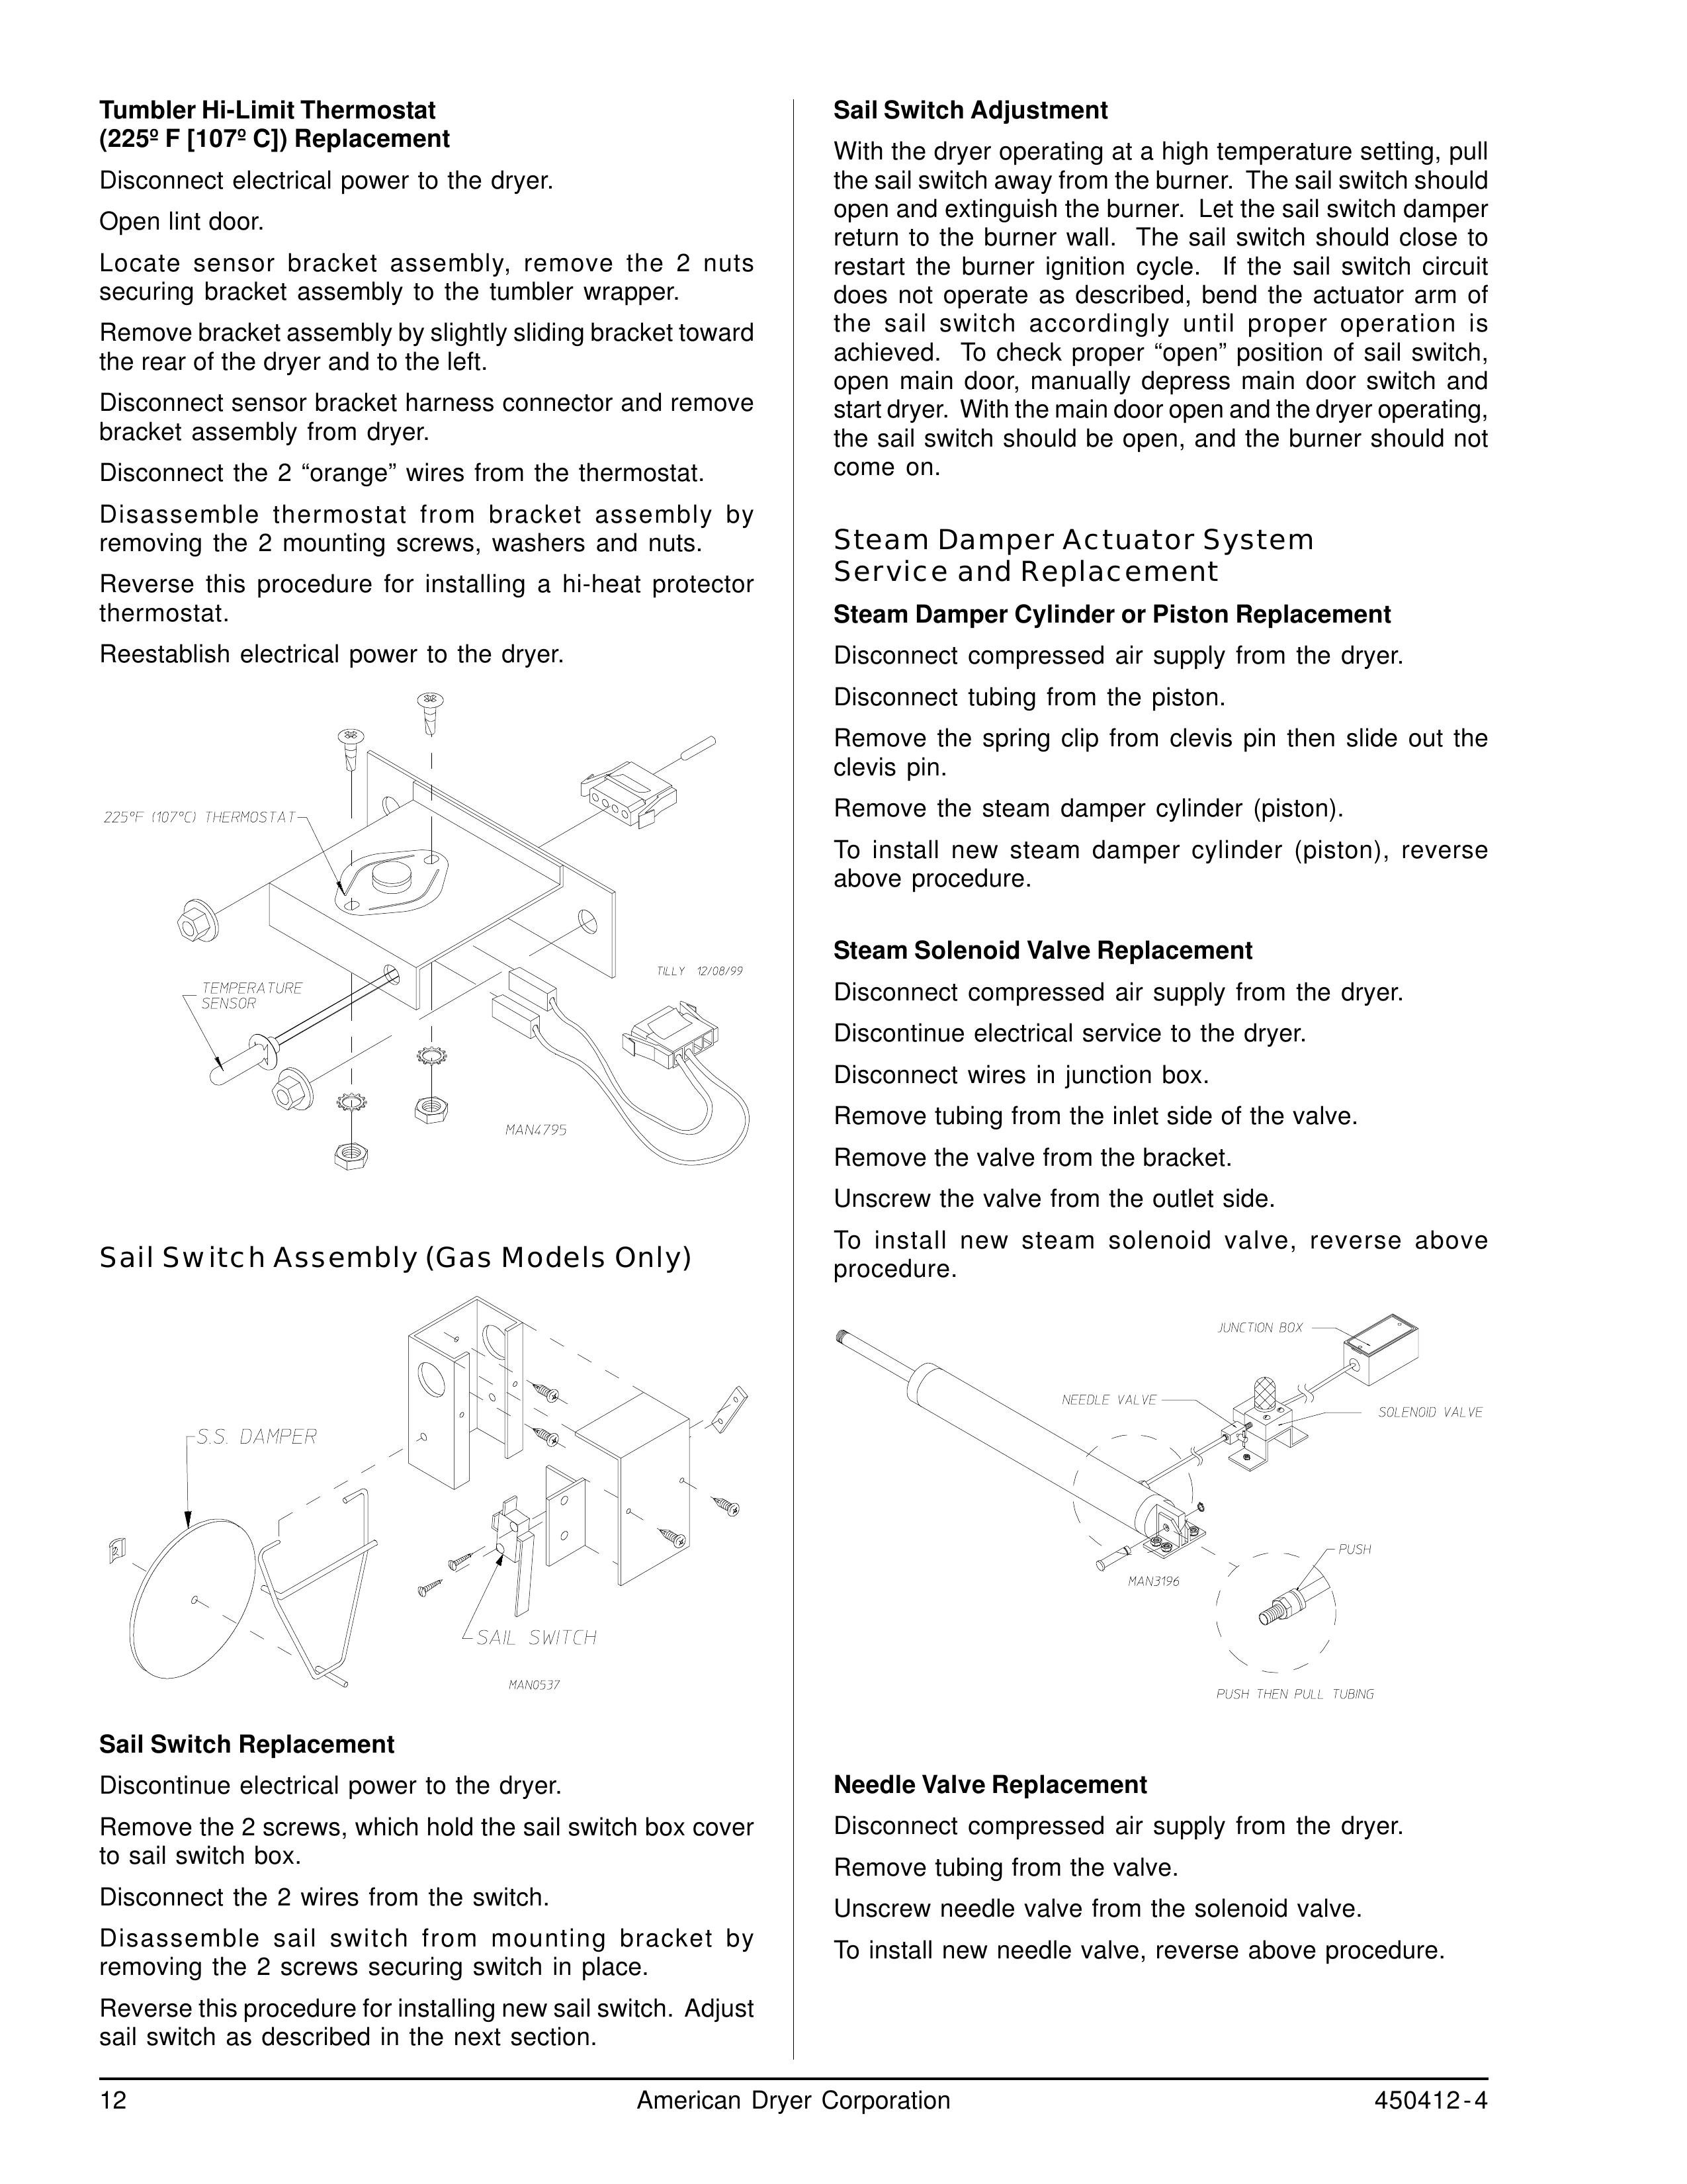 ADC ML-122 Clothes Dryer User Manual (Page 12)